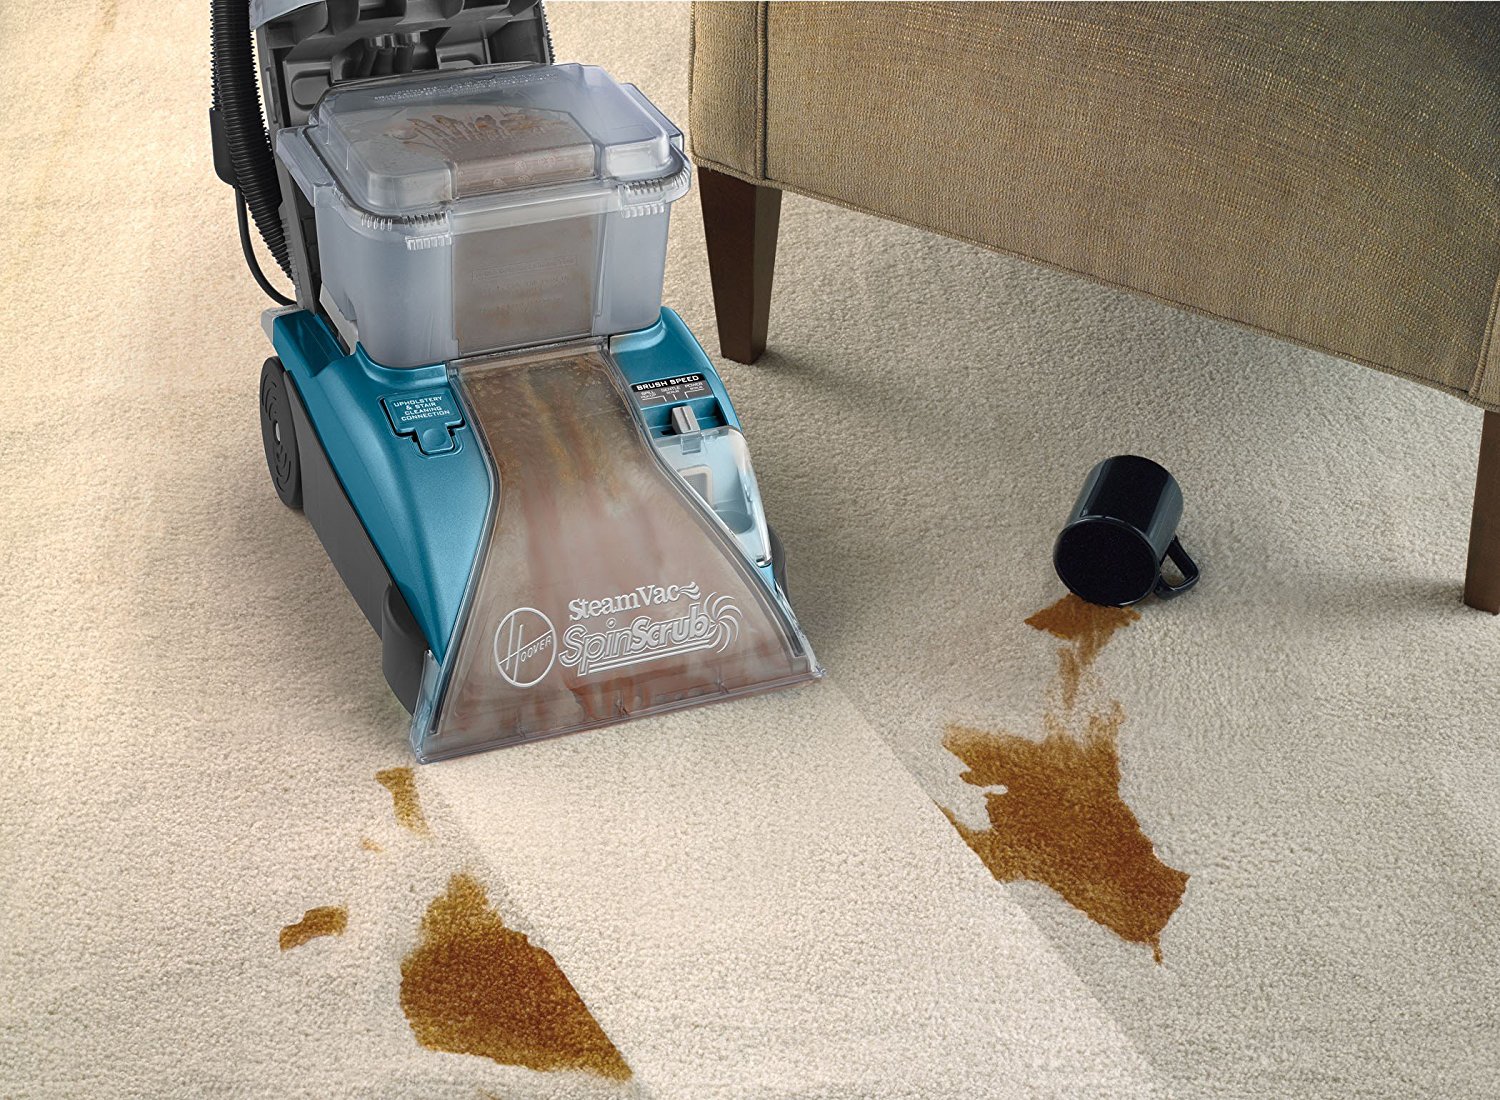 Hoover Carpet Cleaner SteamVac with Clean Surge Carpet Cleaner Machine F5914900